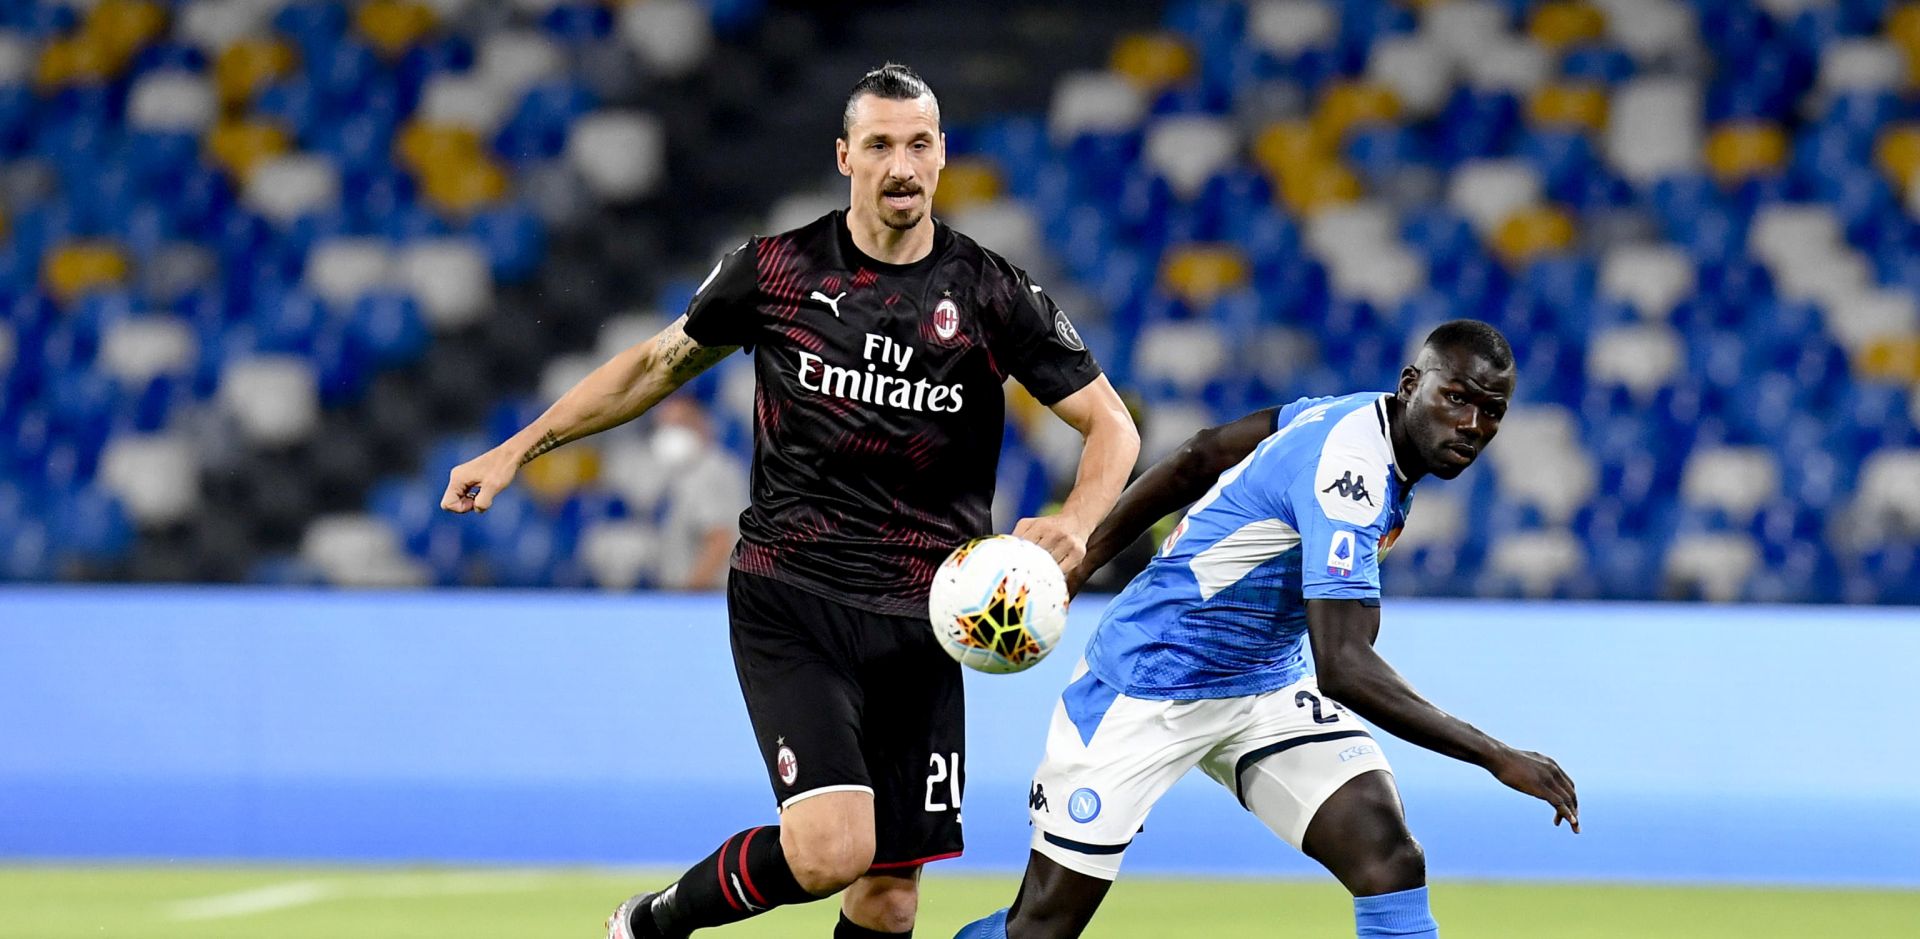 epa08542517 Milan's forward Zlatan Ibrahimovic (L) and  Napoli's defender Kalidou Koulibaly  in action during the Italian Serie A  soccer  match SSC Napoli vs  AC Milan at the San Paolo stadium in Naples, Italy, 12 July 2020.  EPA/CIRO FUSCO